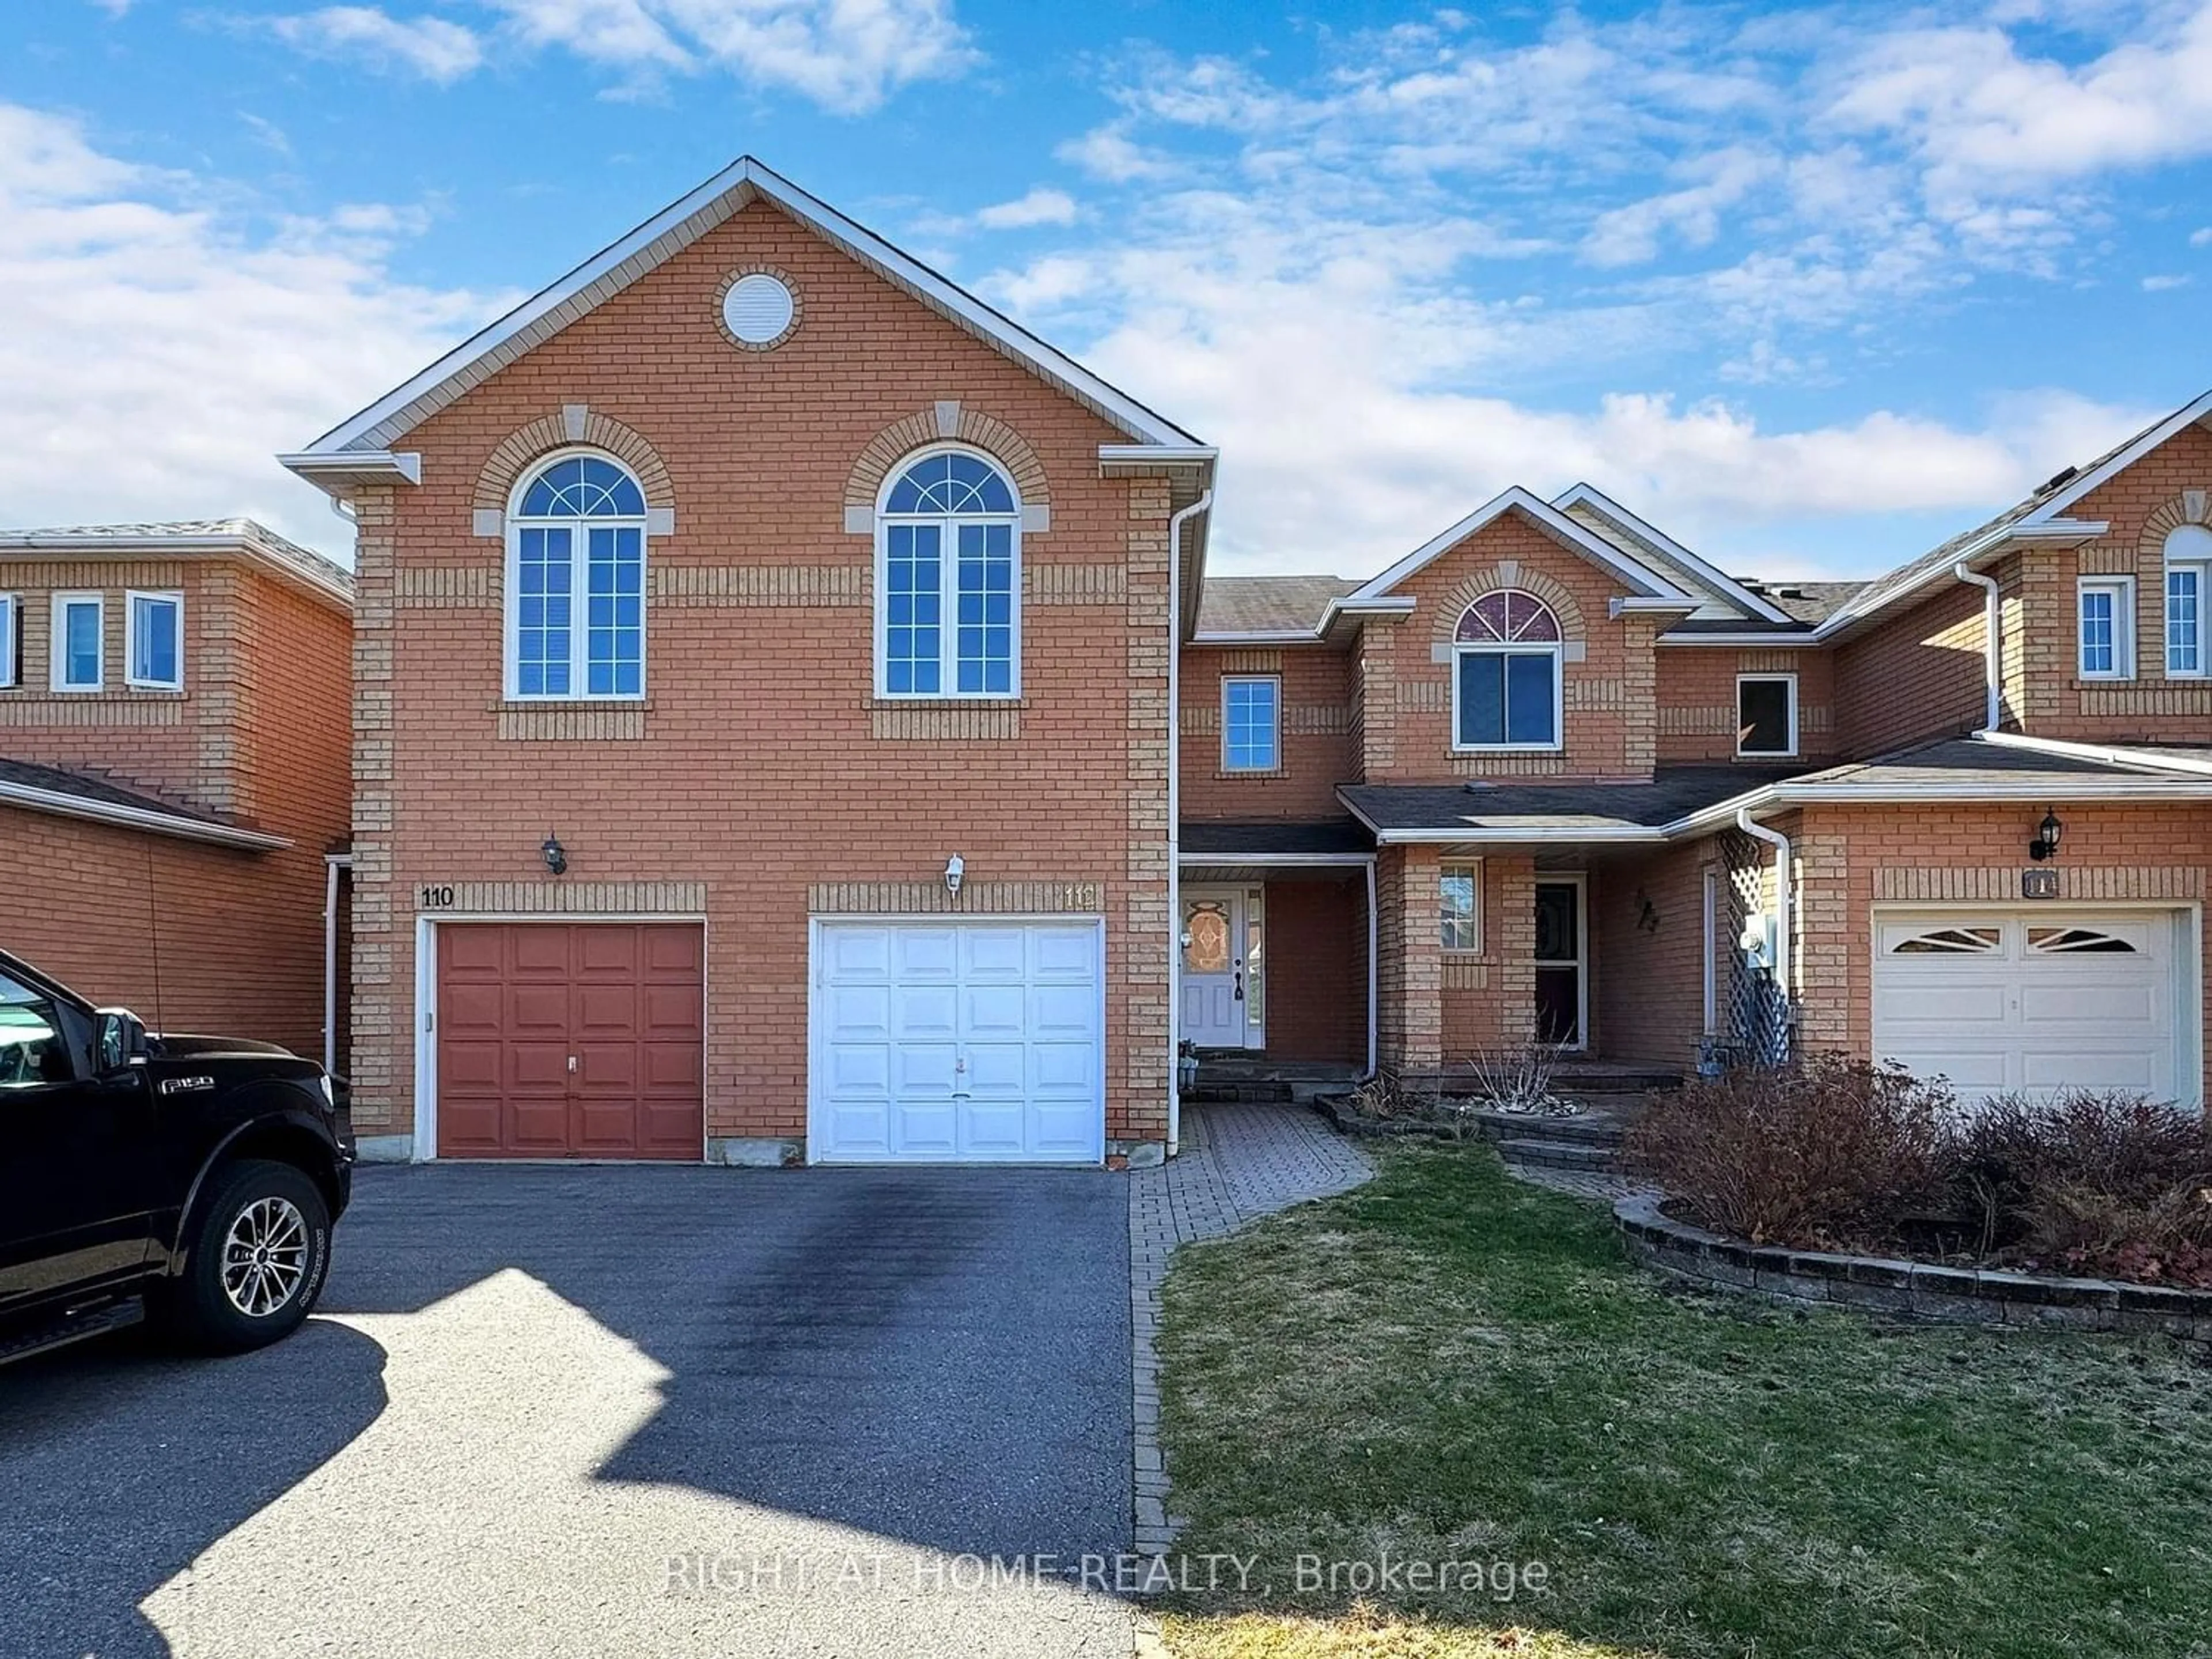 Home with brick exterior material for 112 Creekwood Cres, Whitby Ontario L1R 2K4